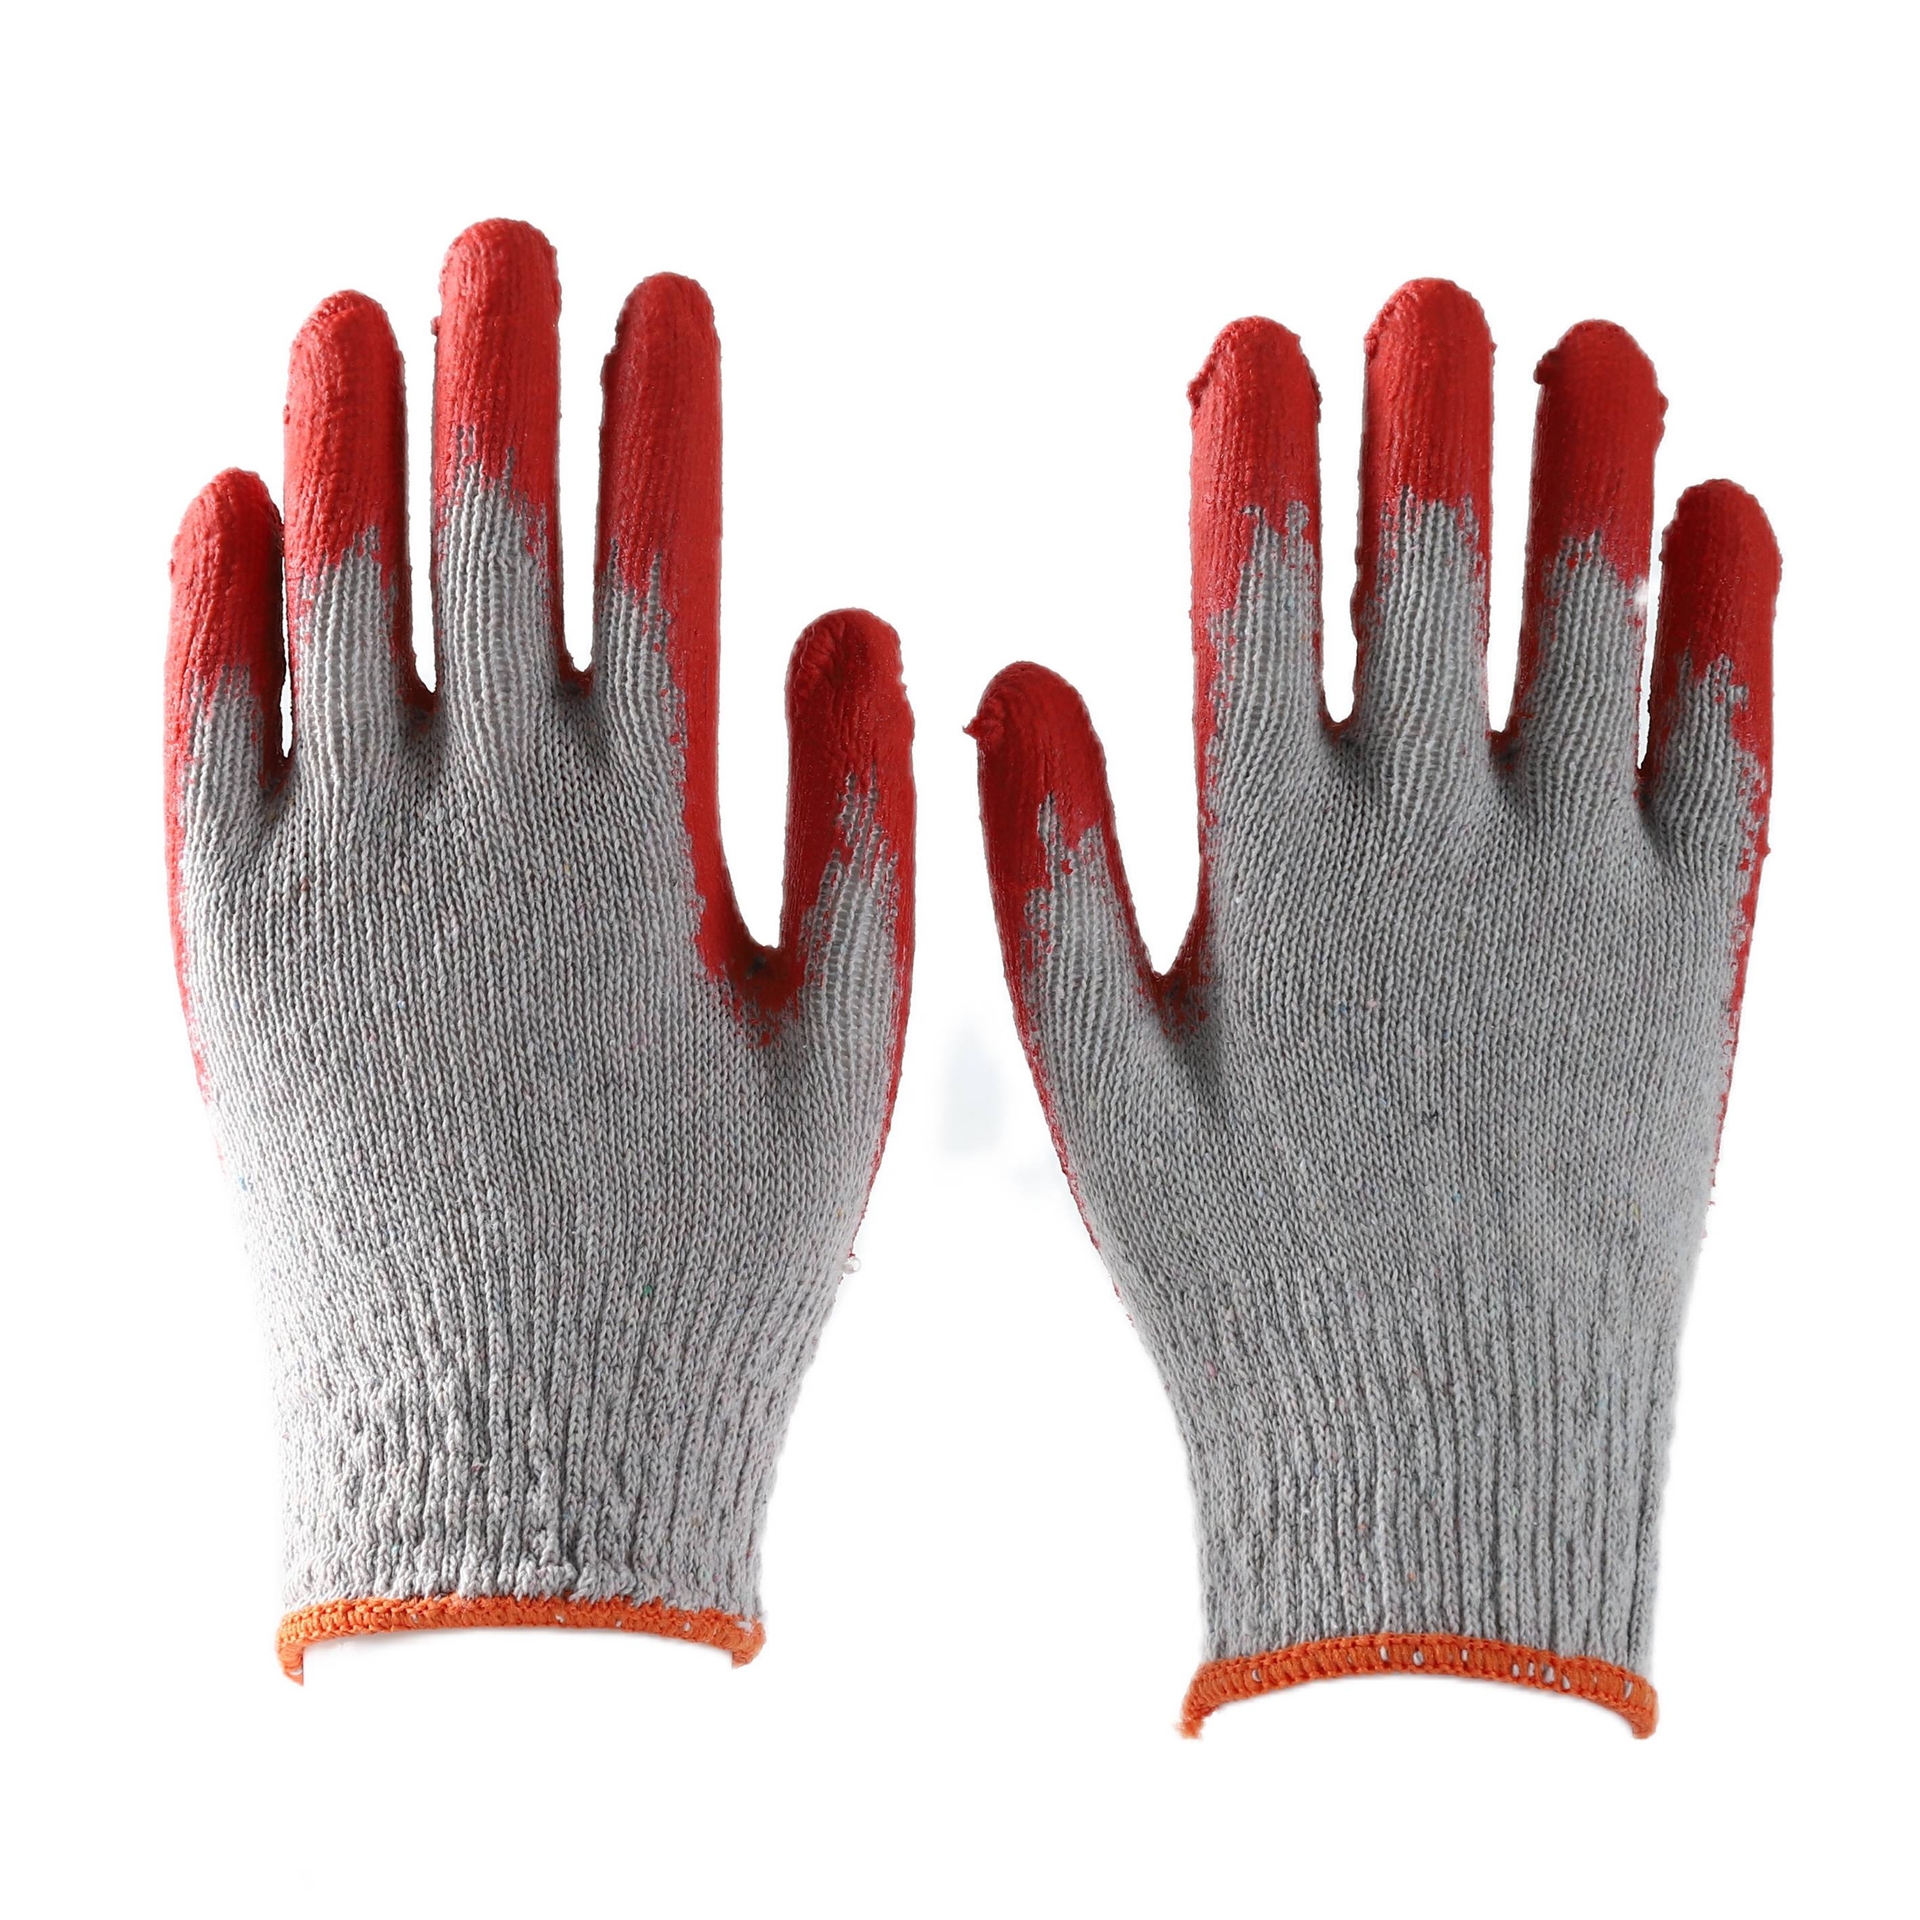                 White cotton with red latex smooth coating gloves            